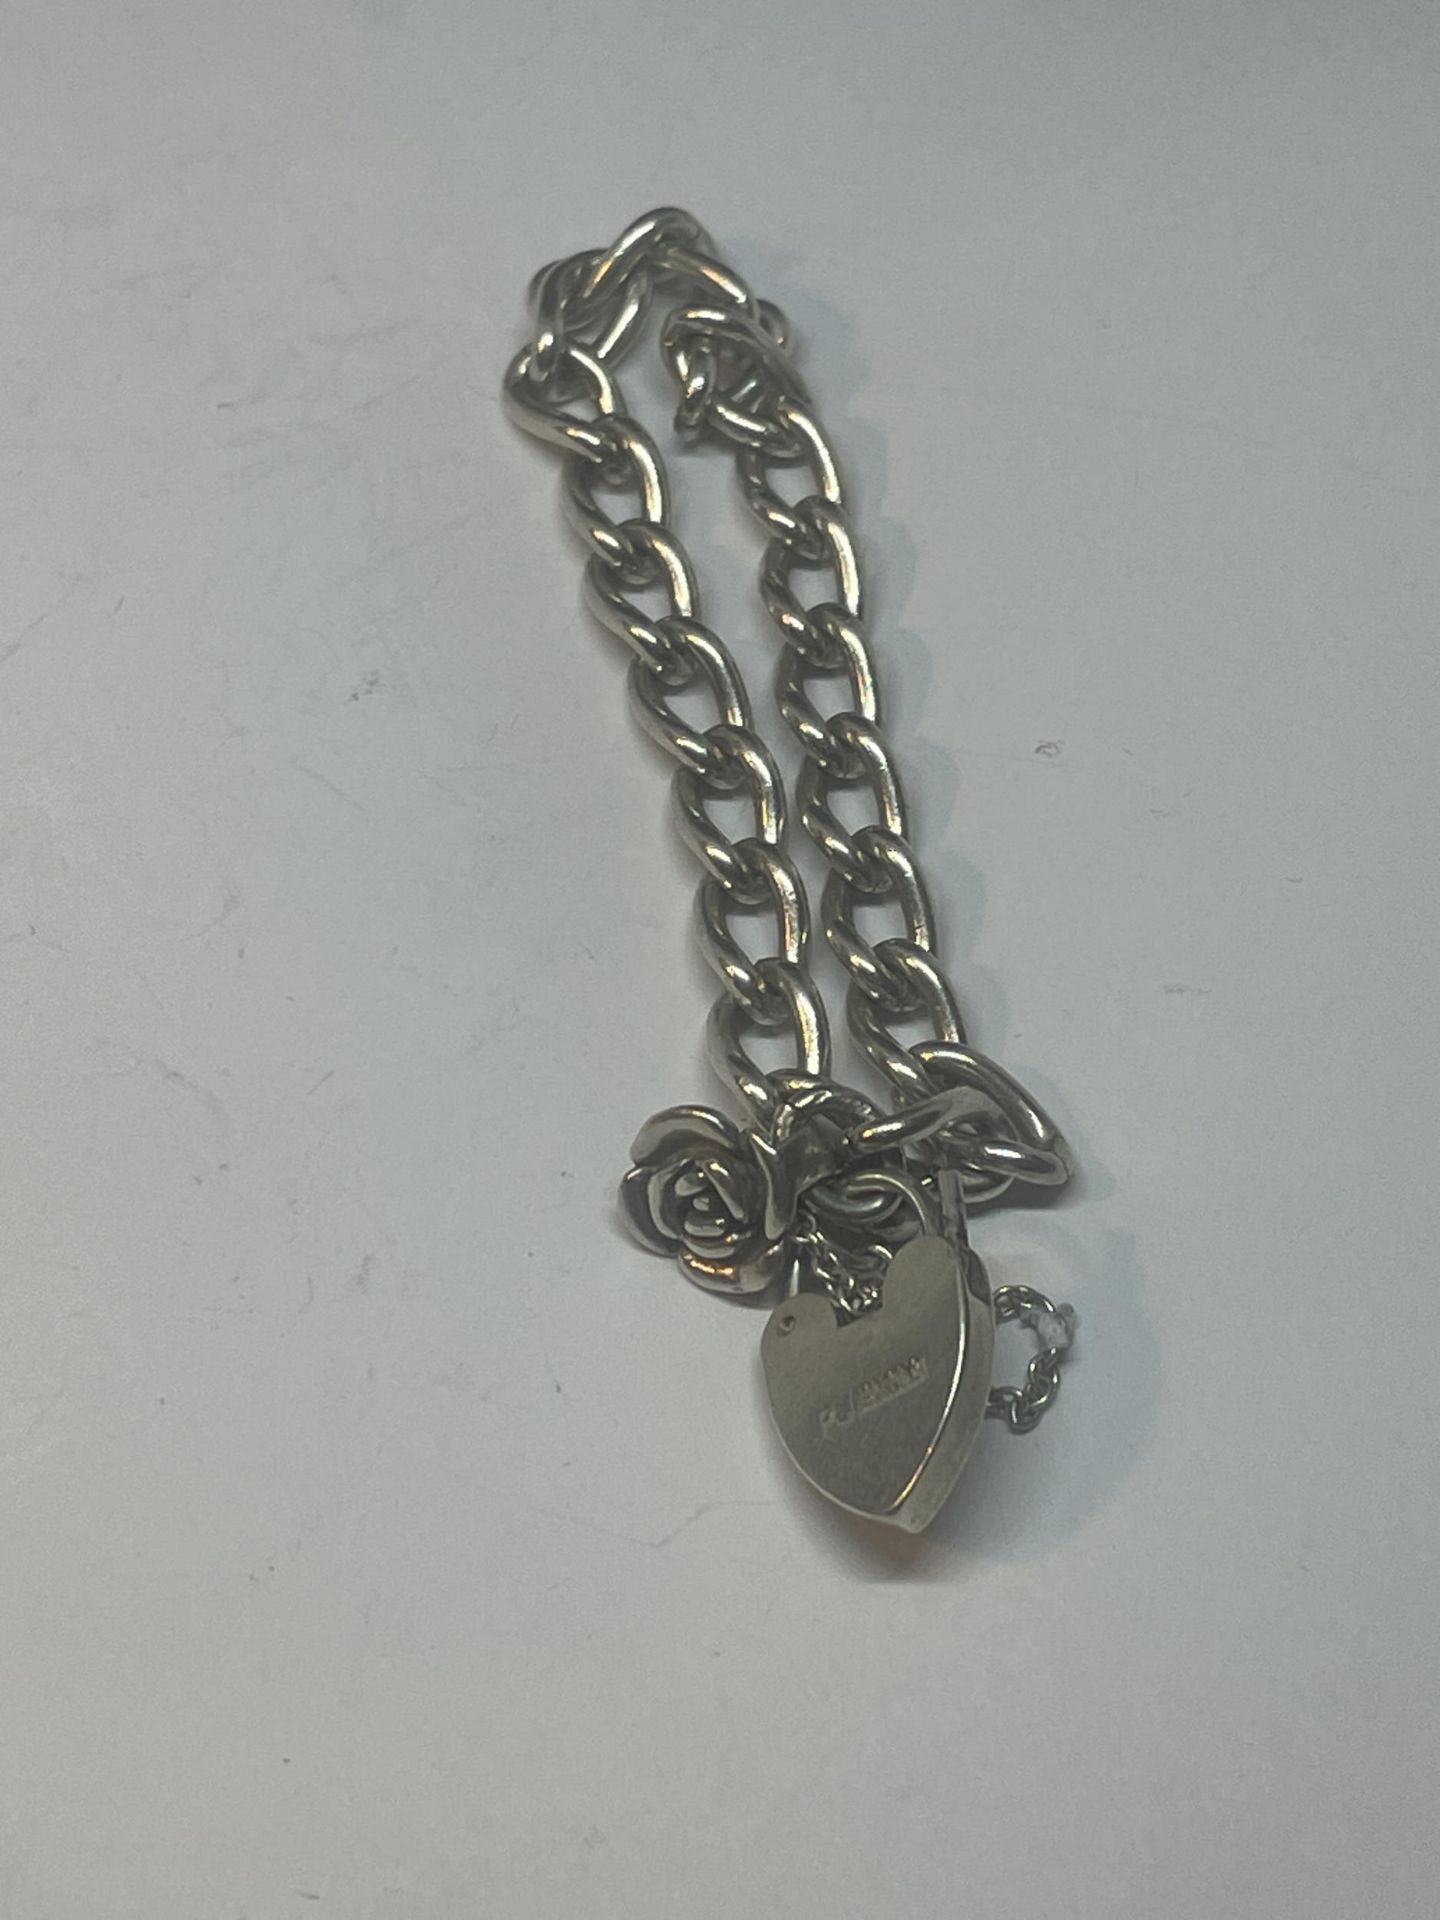 A SILVER WRIST CHAIN WITH ROSE CHARM WITH SILVER HEART PADLOCK